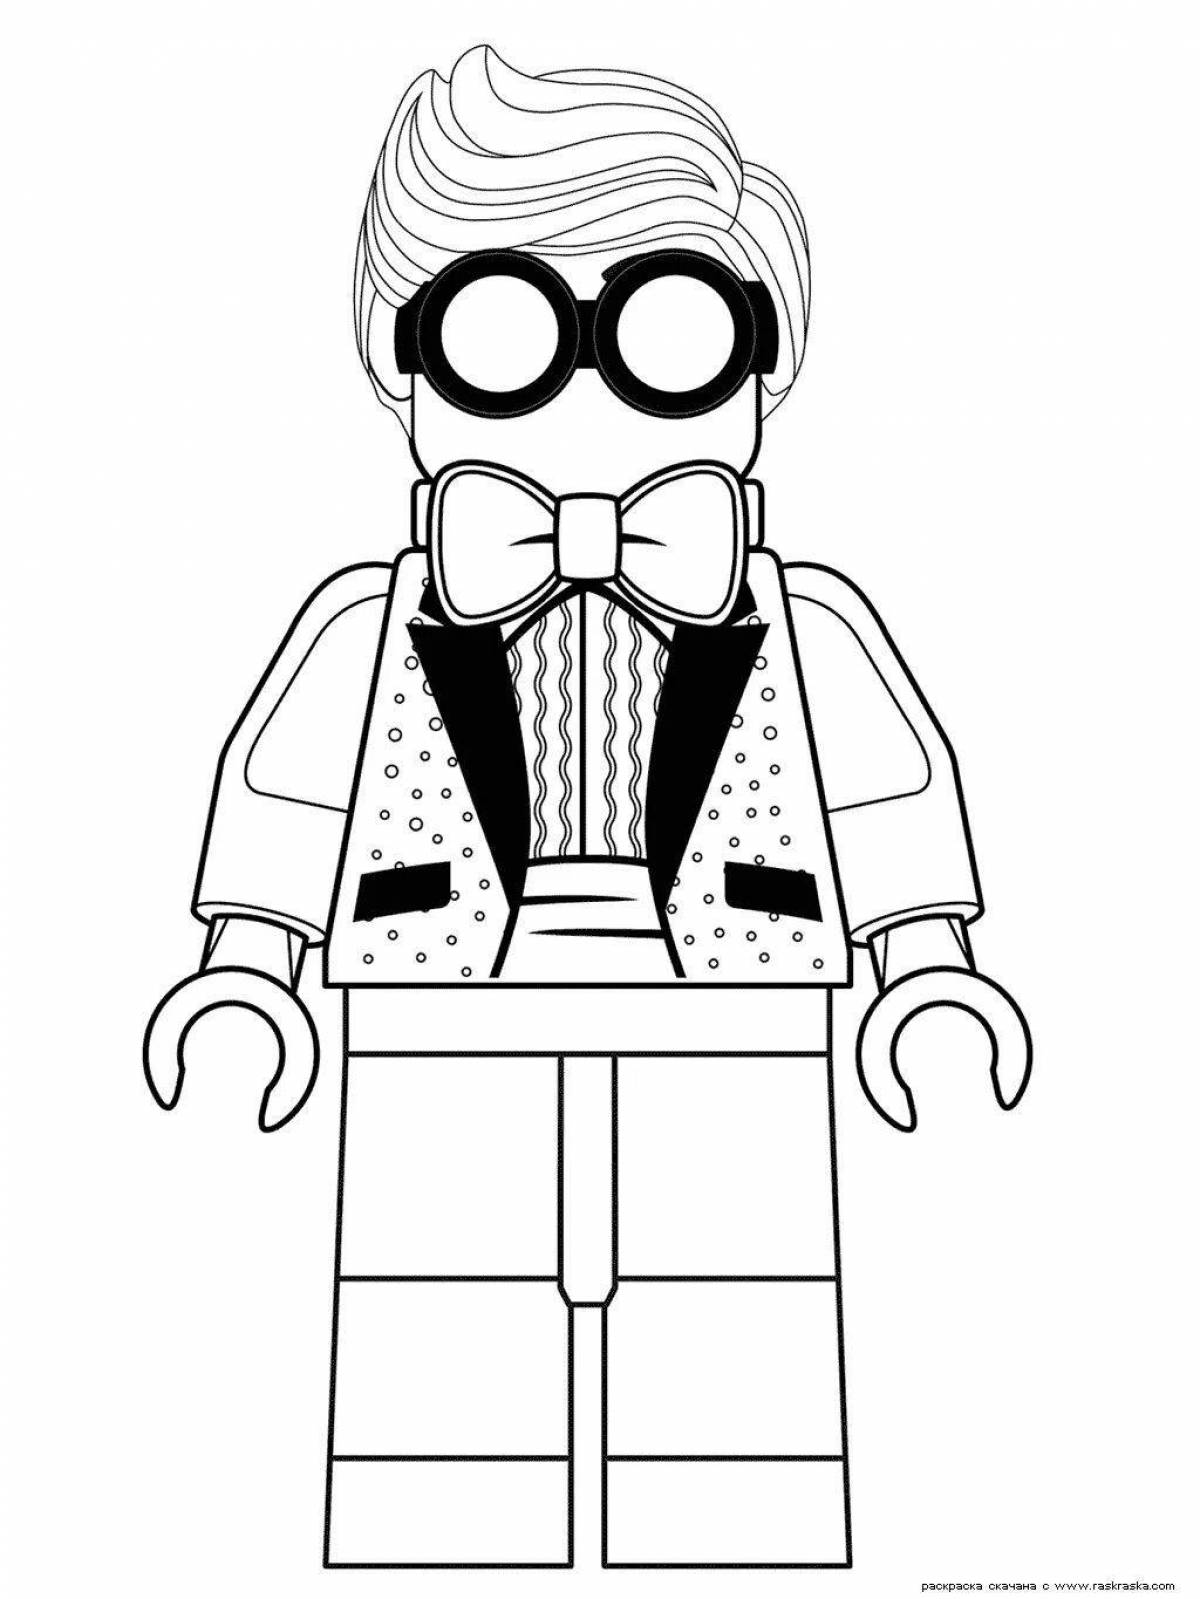 Awesome lego flash coloring page